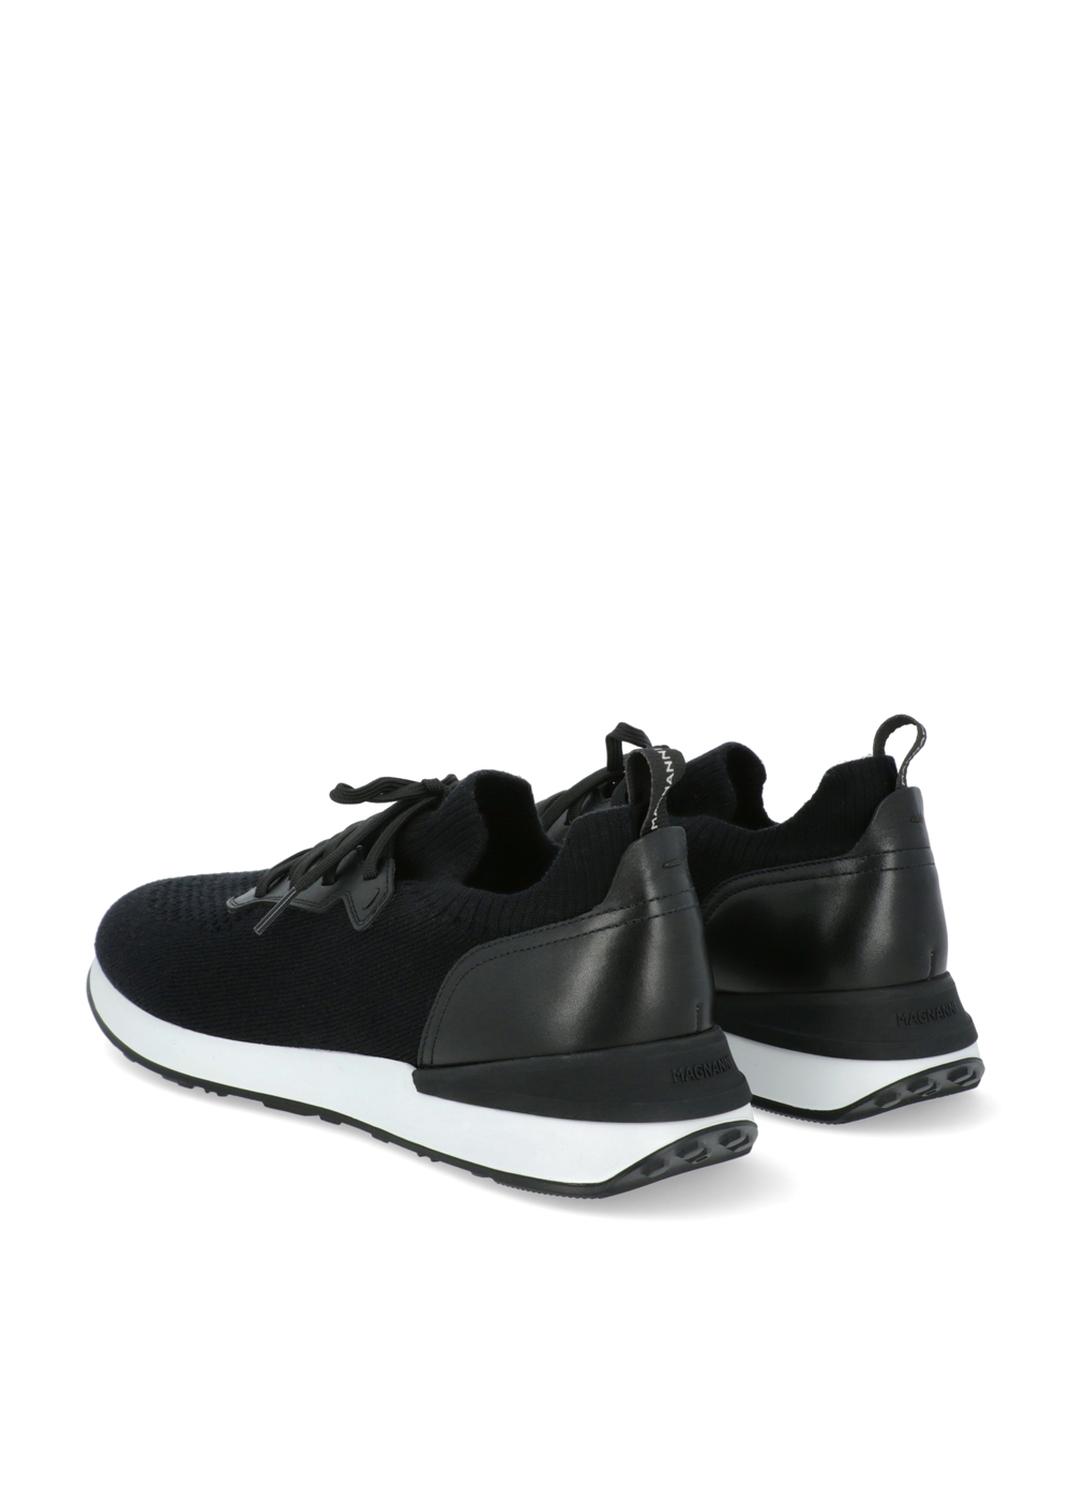 Magnanni Sneakers  MGN-25612